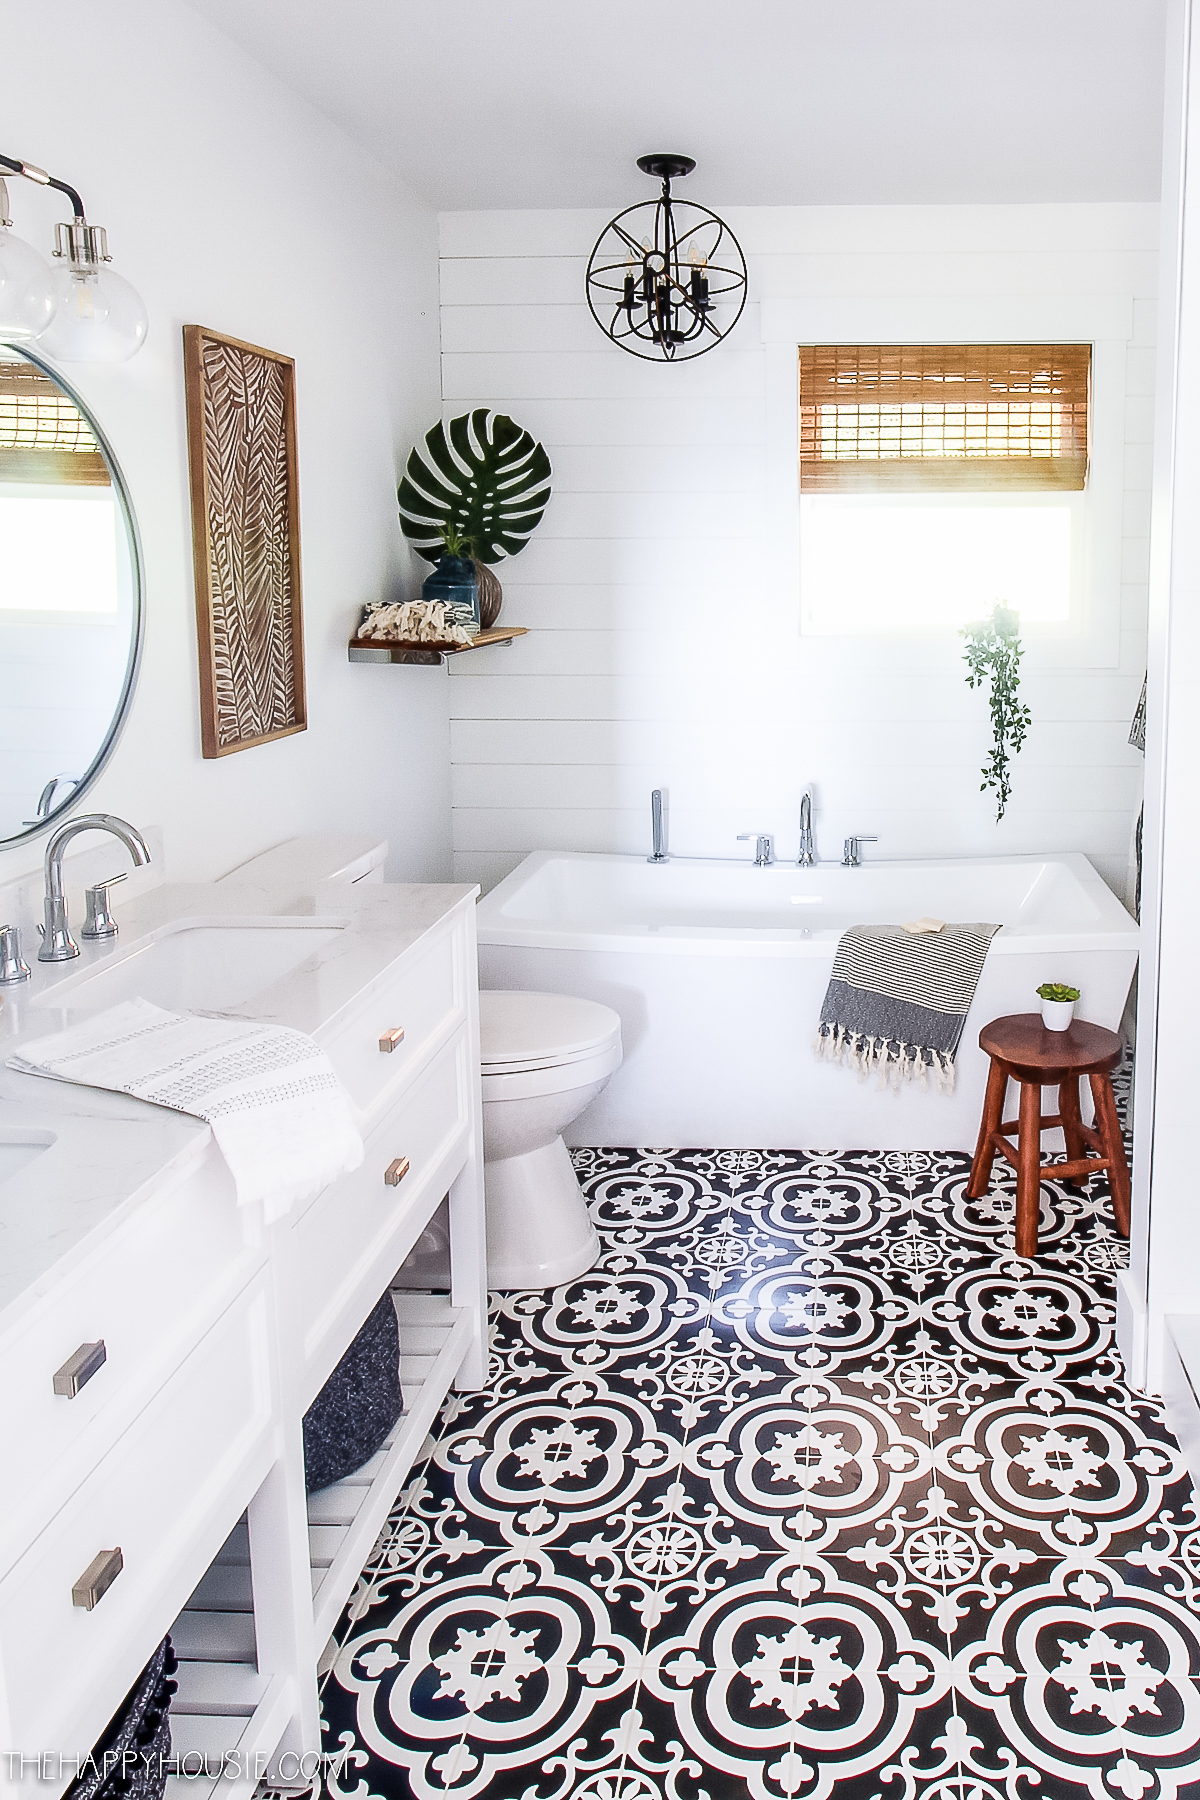 The same bathroom with a black and white floor and a white vanity.